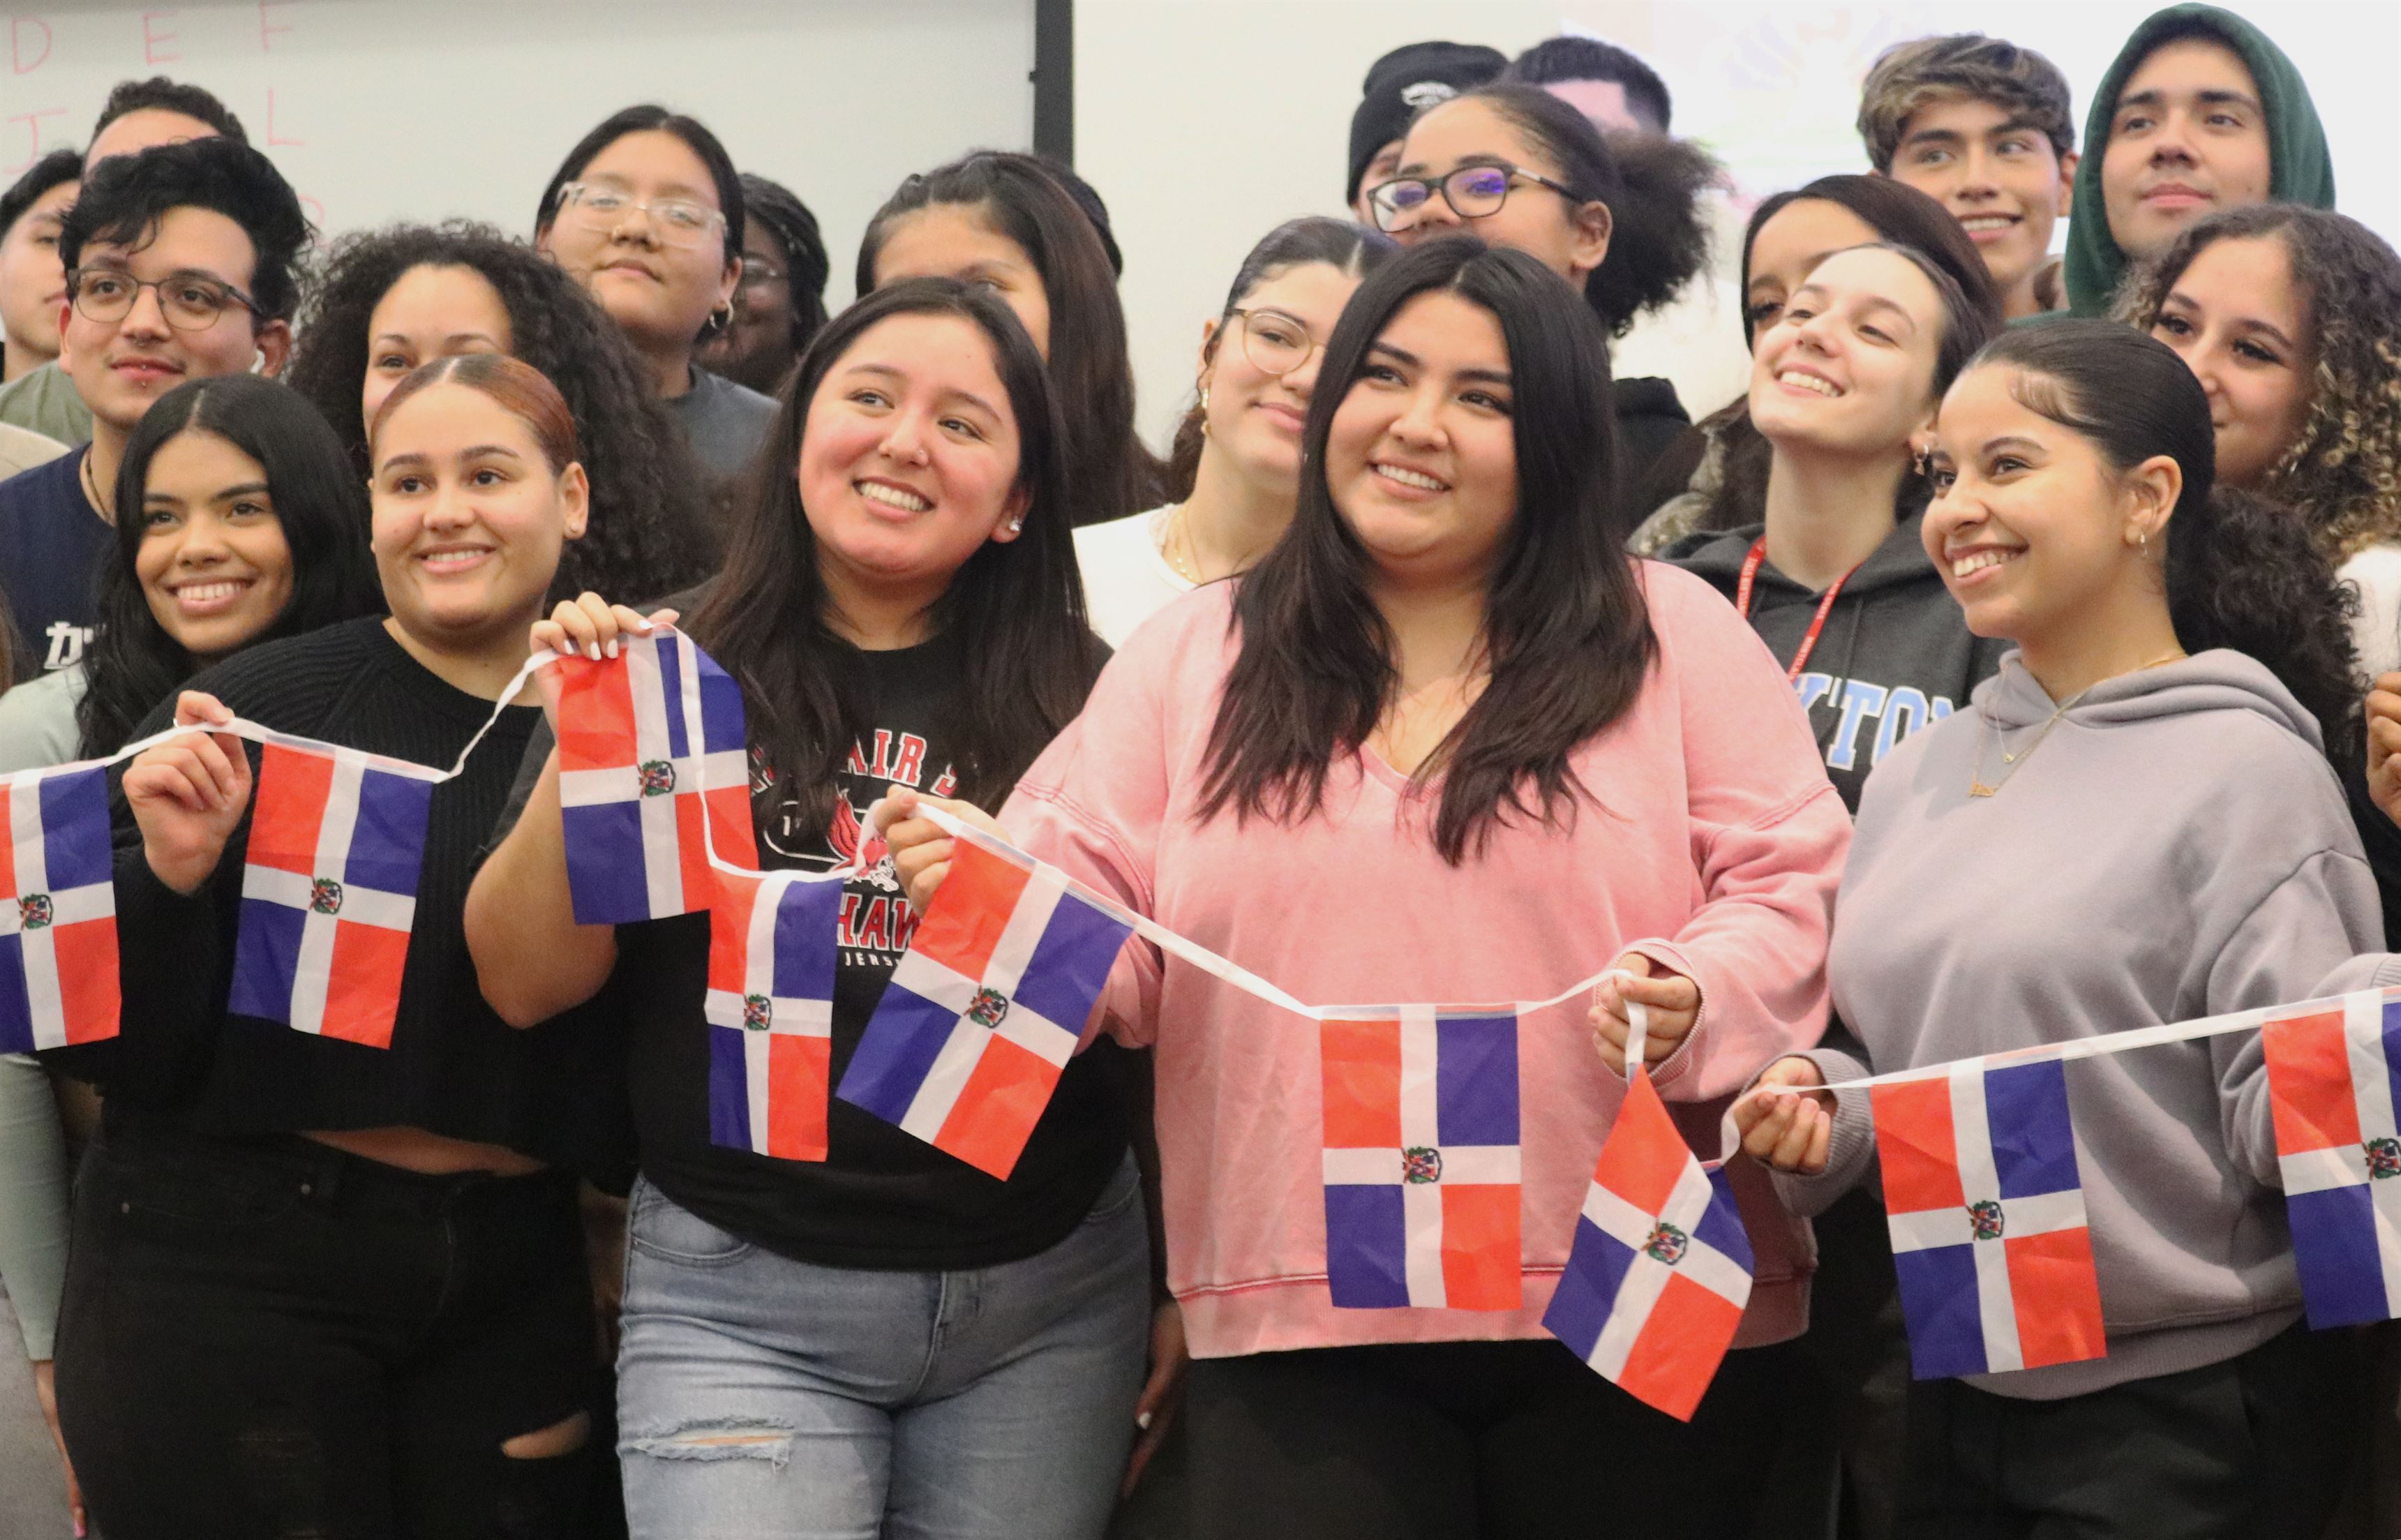 Members of the Latin America Student Organization (LASO) pose for a group photo during their general member meeting held in University Hall. Darian Mozo | The Montclarion